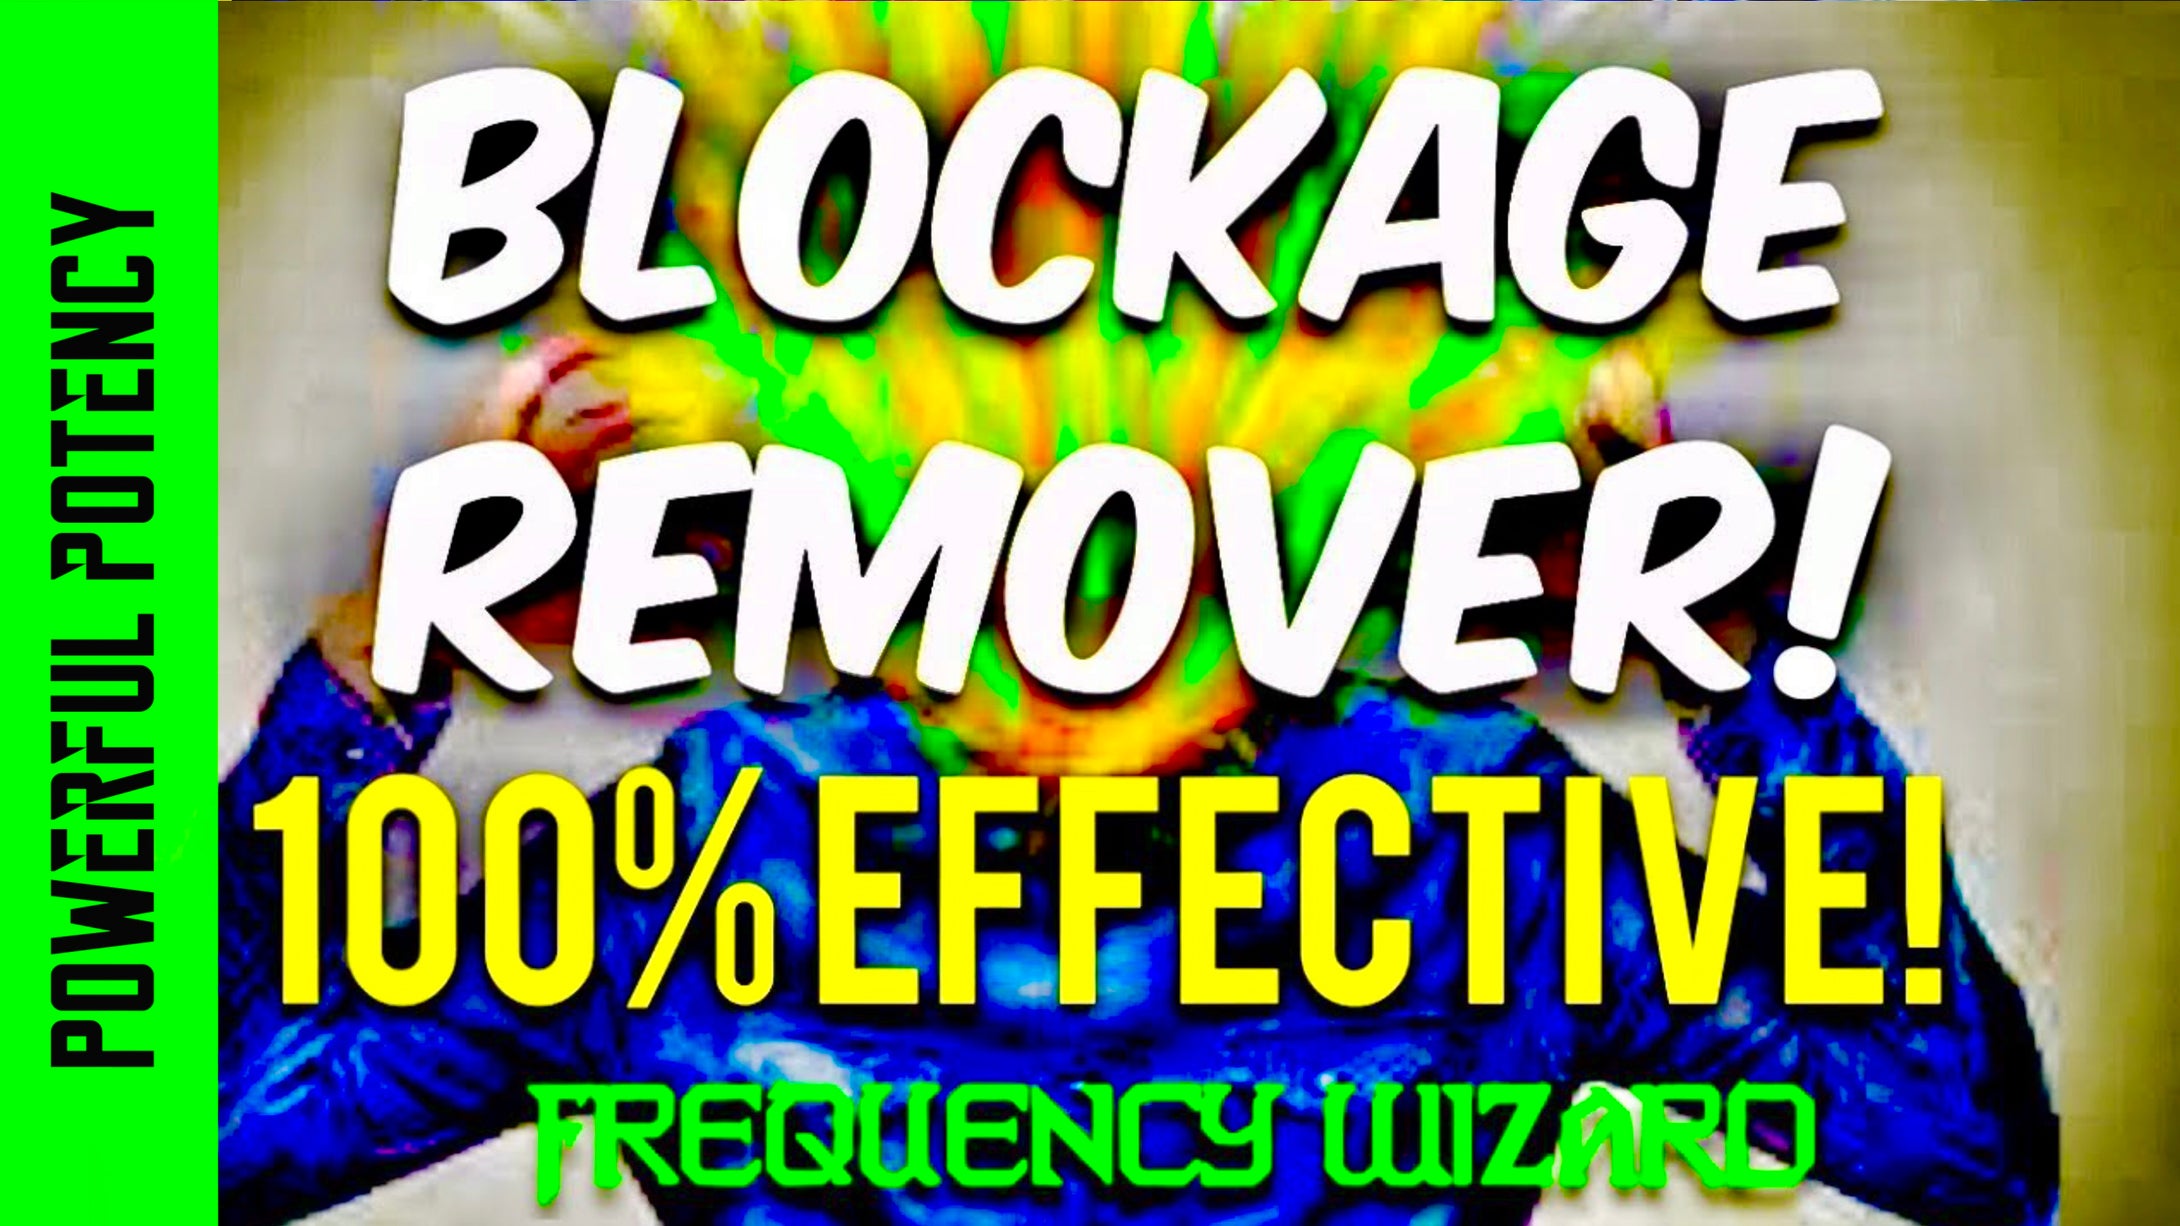 THE BEST BLOCKAGE REMOVER EVER CREATED! 100% EFFECTIVE! GET RESULTS NOW!! SUBLIMINAL AFFIRMATIONS